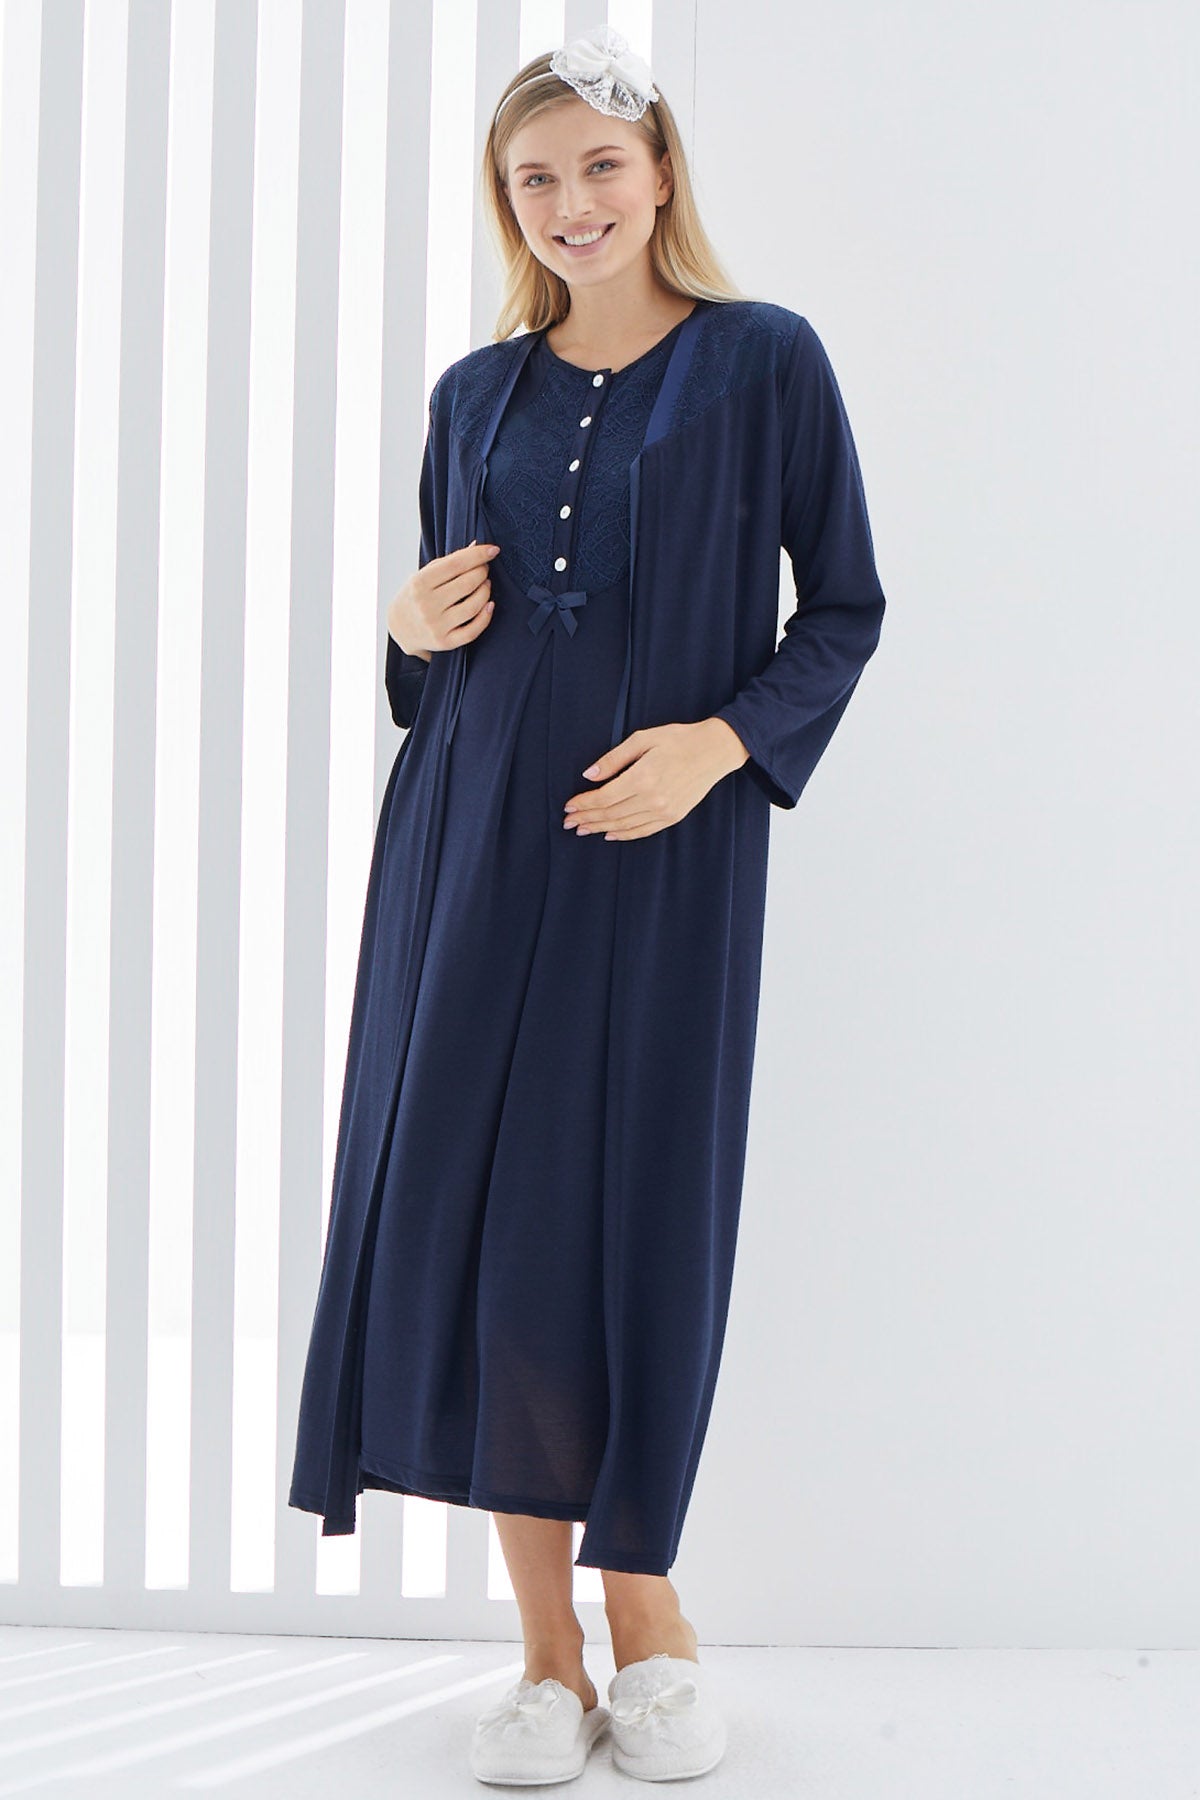 Shopymommy 2265 Guipure Collar Maternity & Nursing Nightgown With Robe Navy Blue